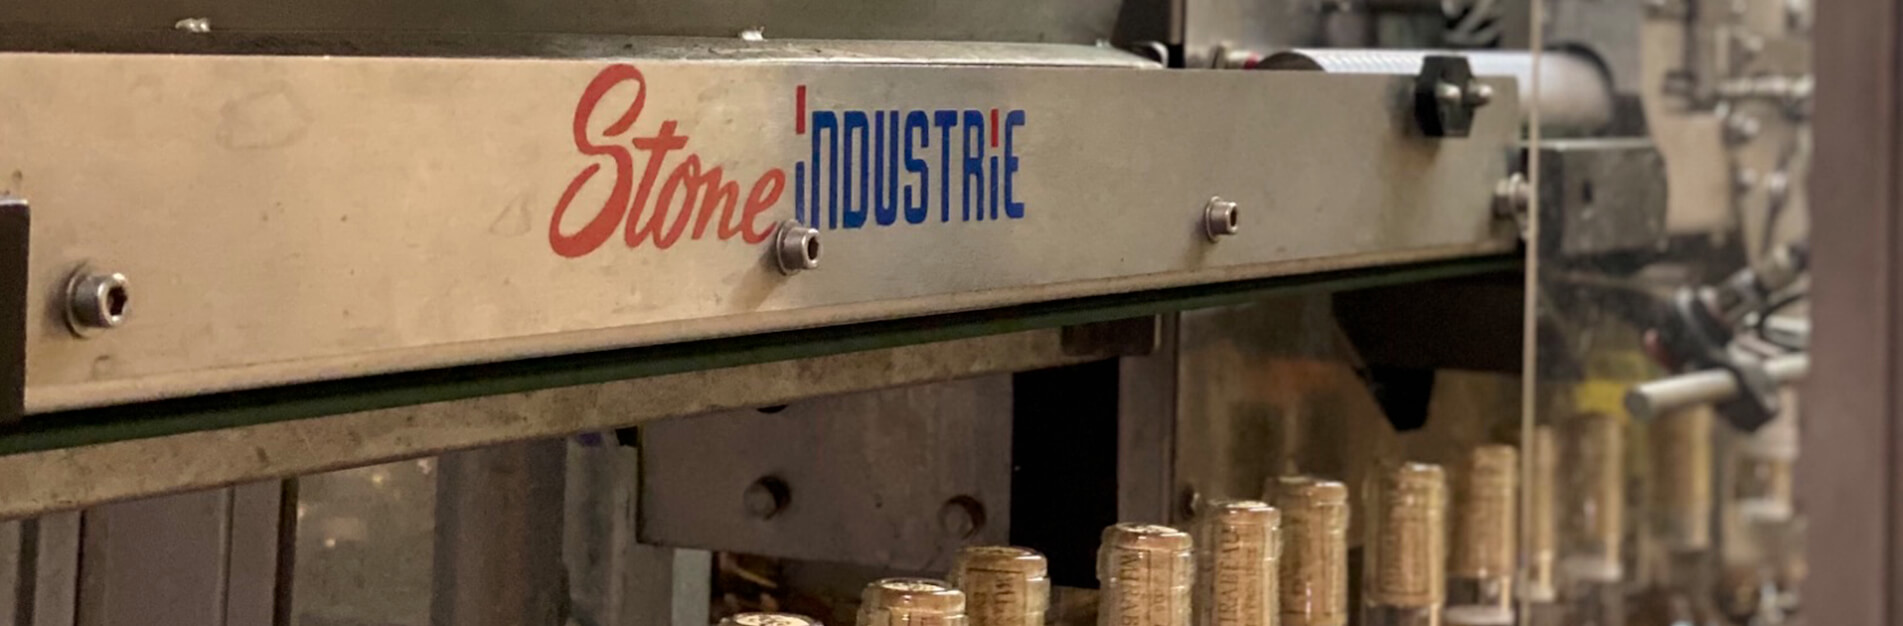 stone industrie know-how